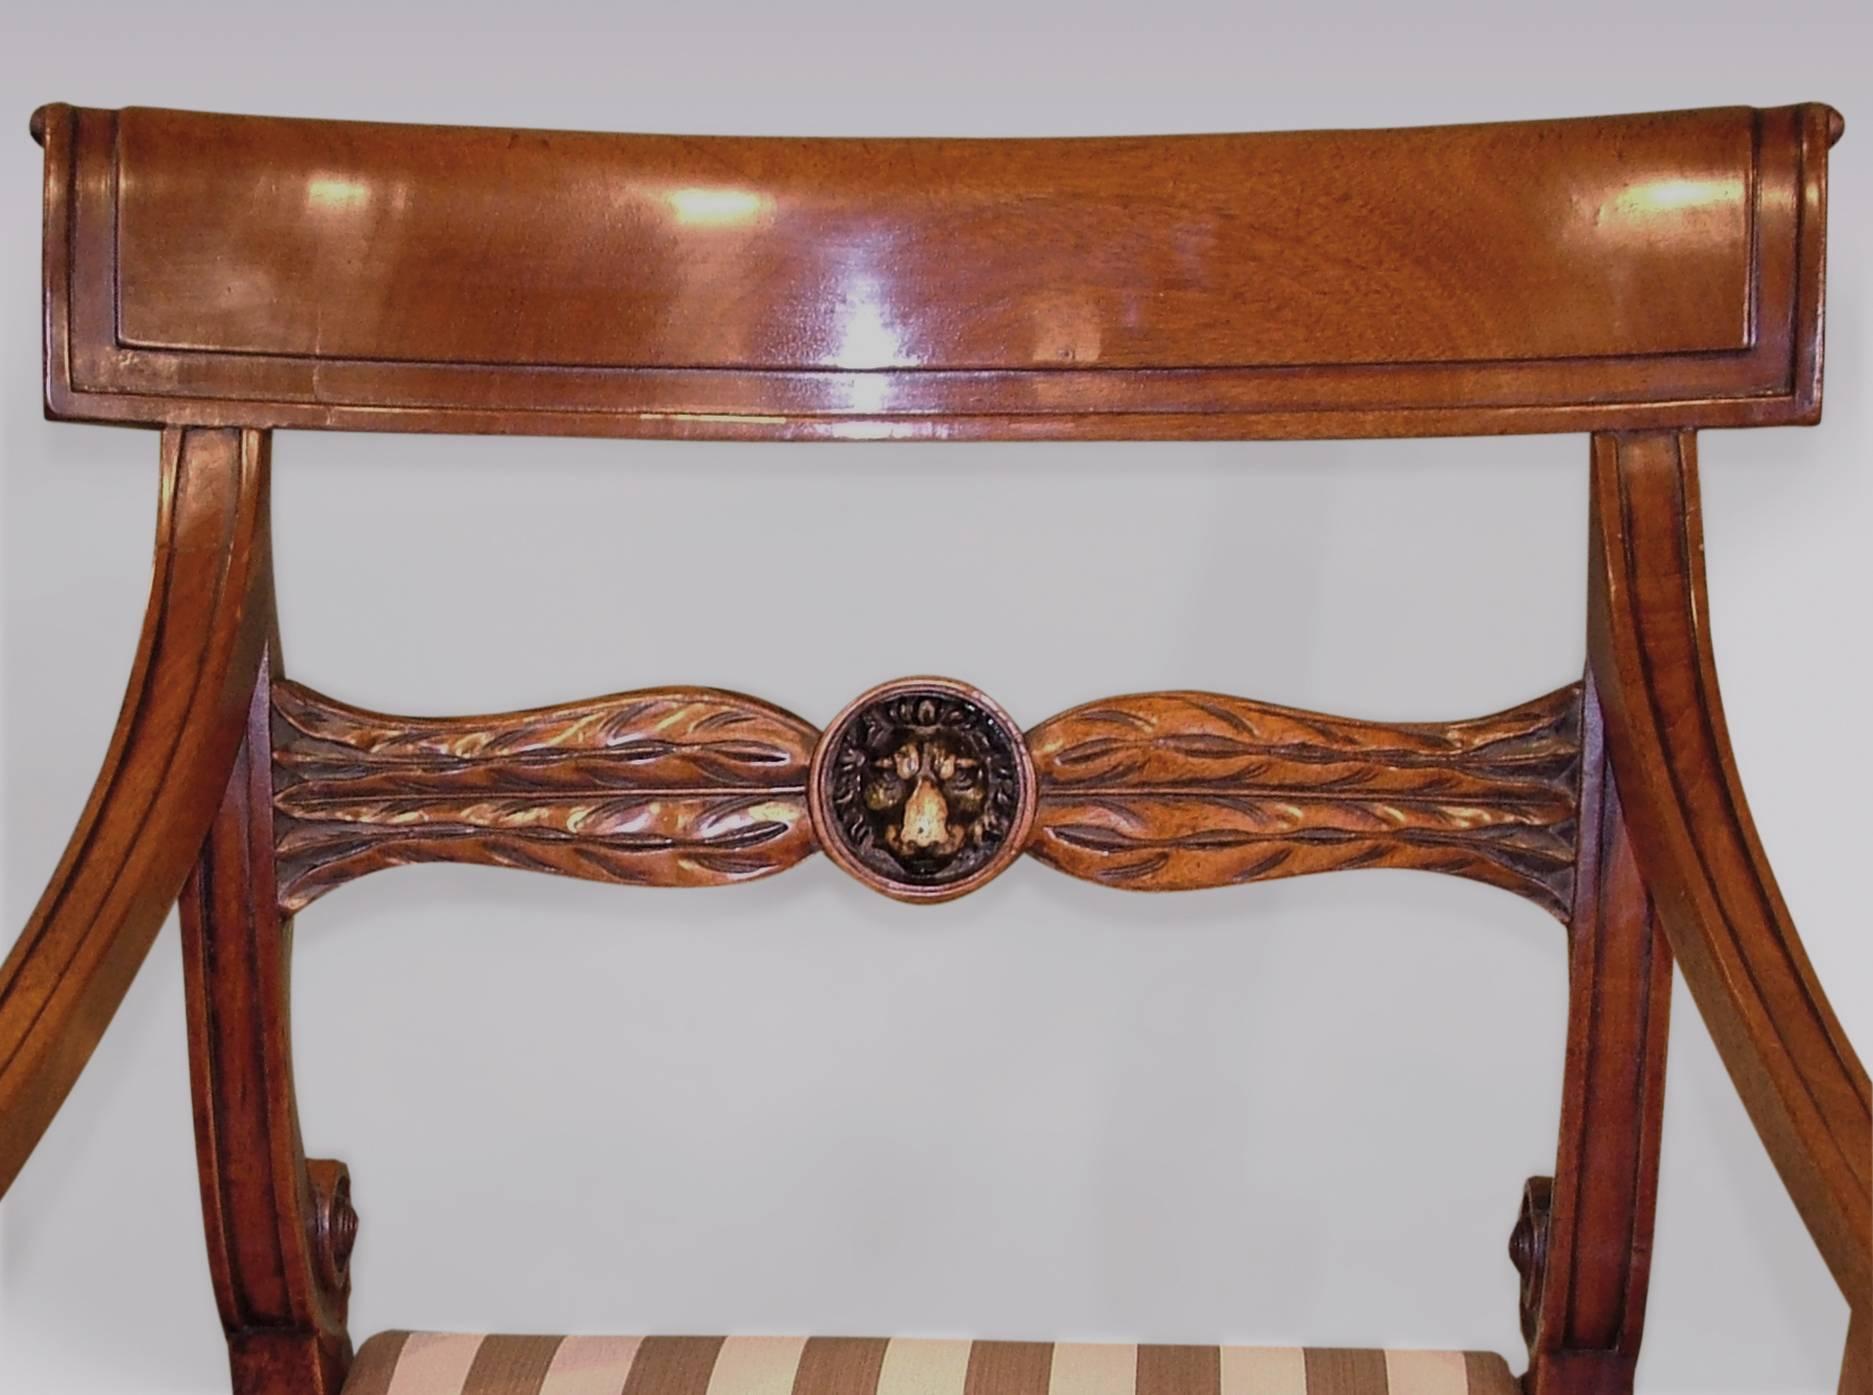 A matched pair of early 19th century Regency period mahogany armchairs, having paneled scroll over backs above leaf carved and lion's head crossrails. The armchairs having lion's paw arm supports raised on sabre legs.